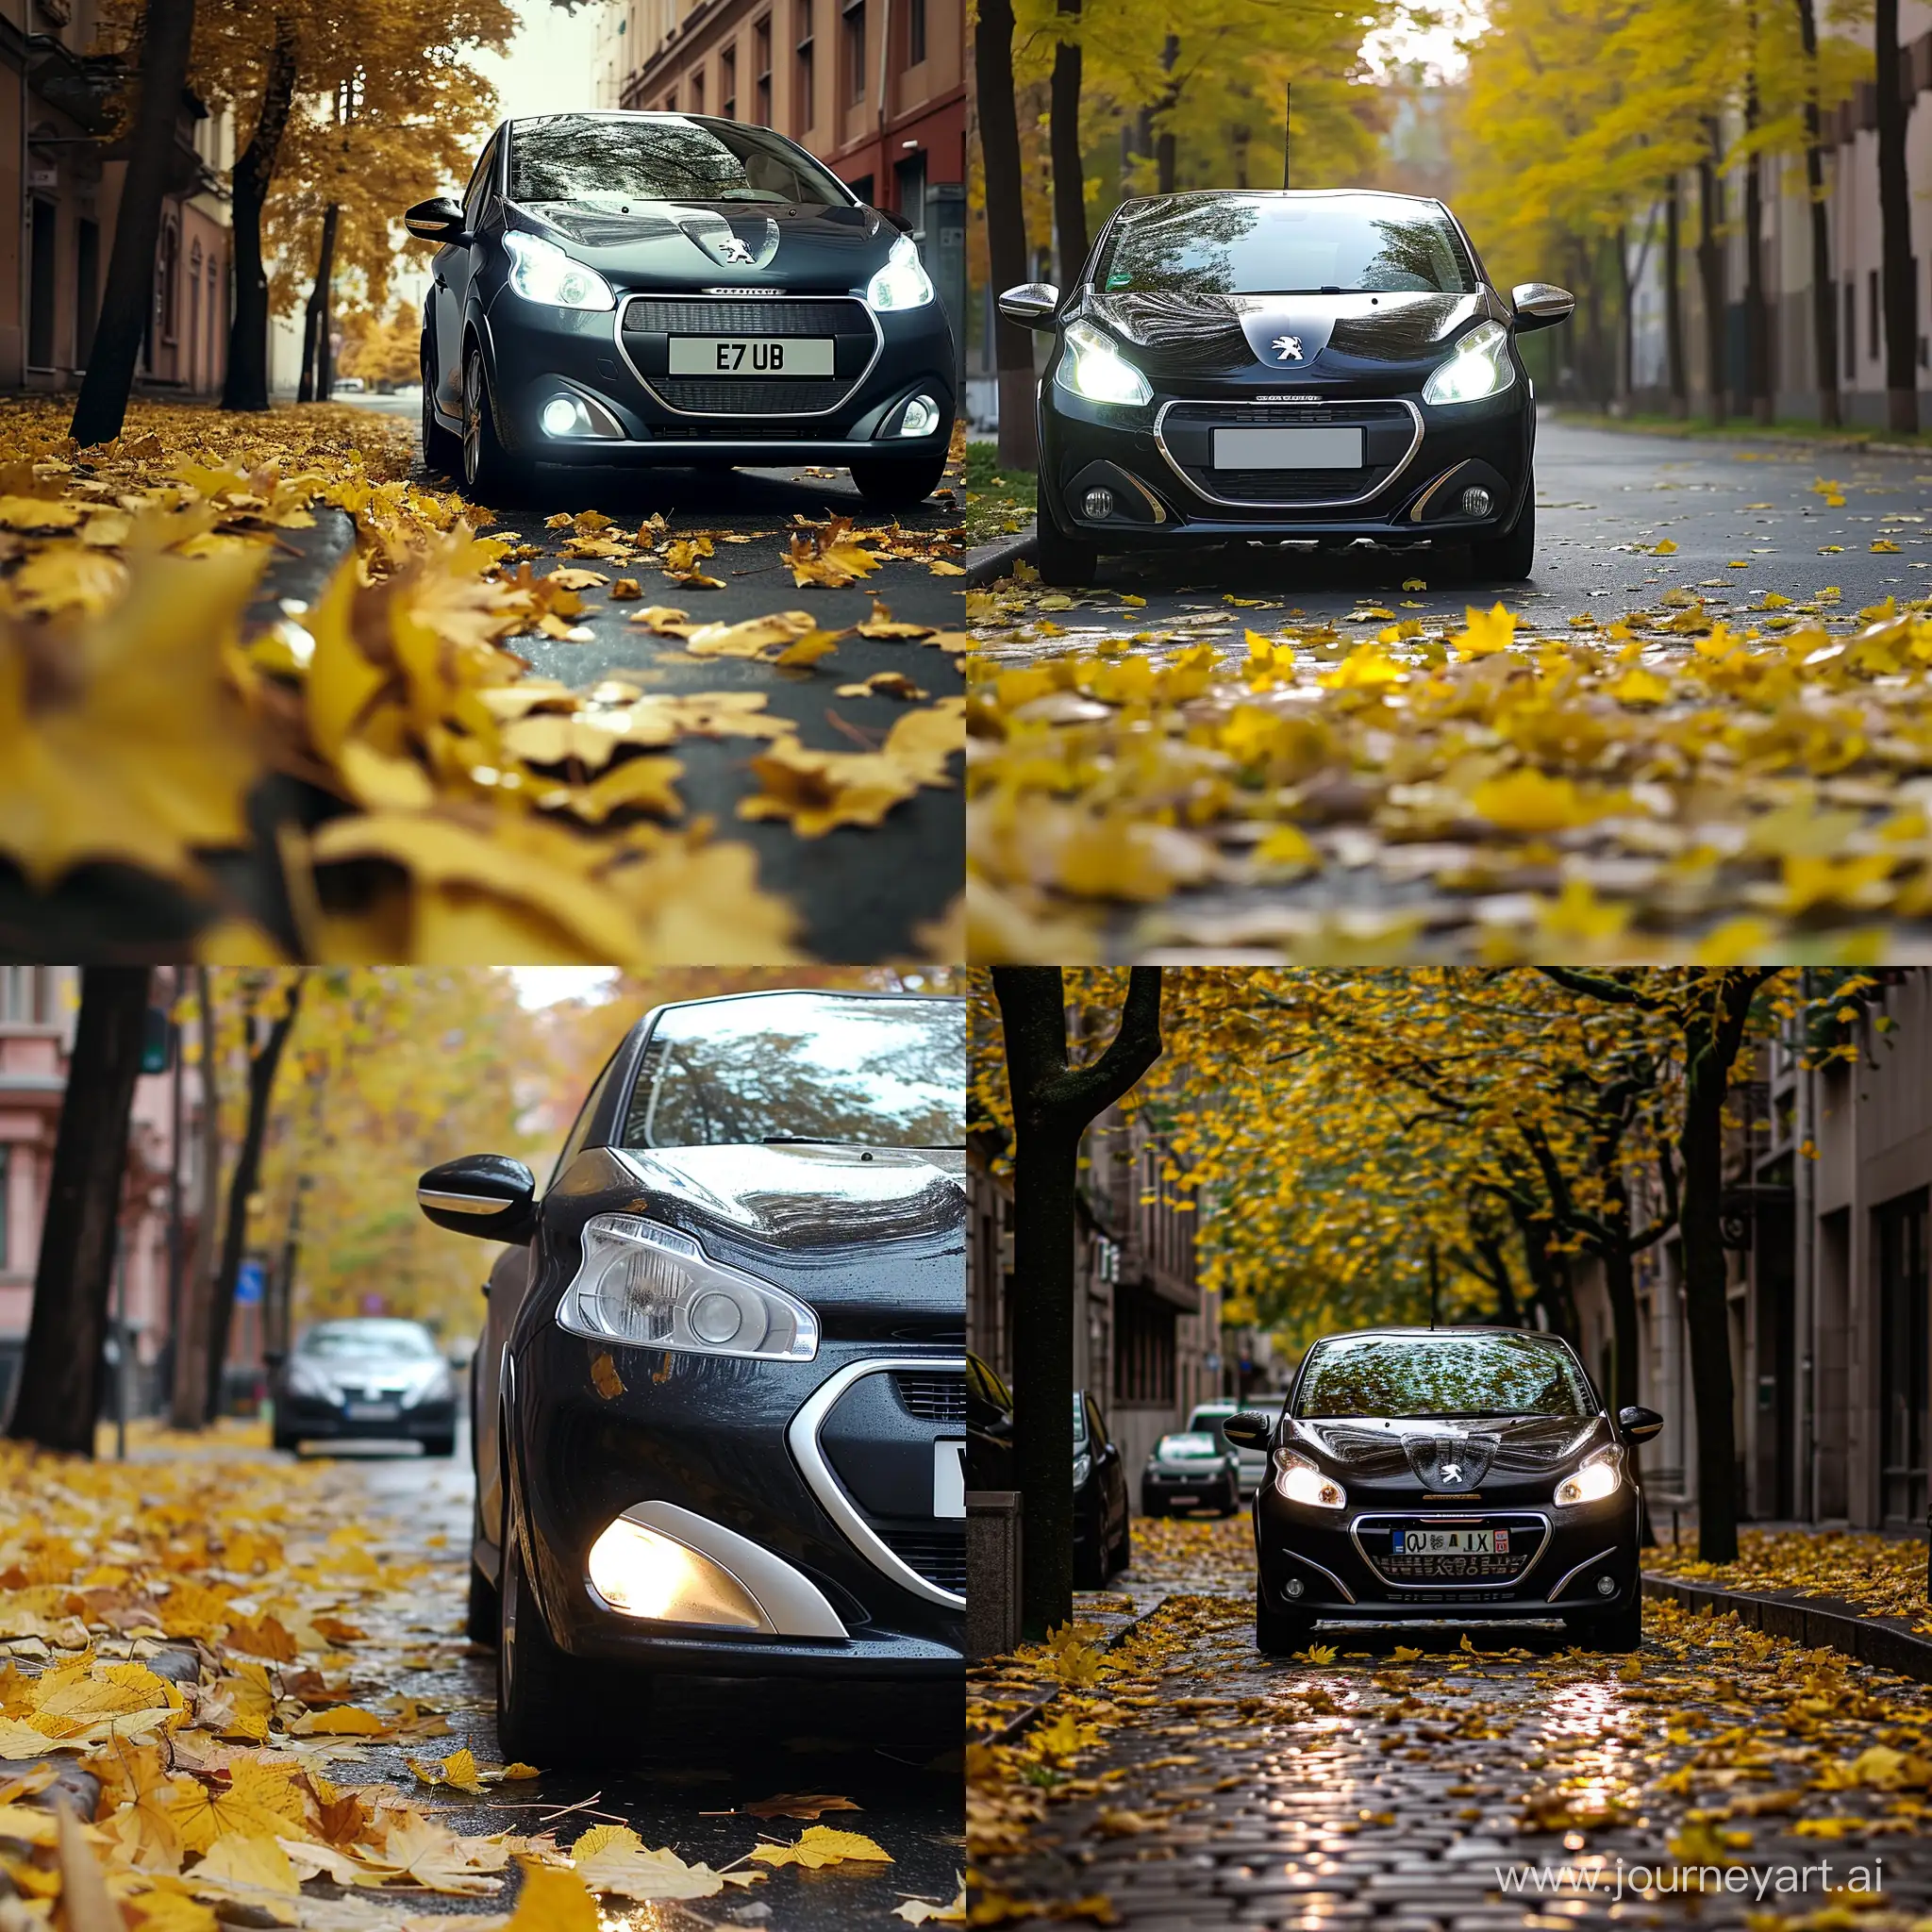 peugeot 207 high beam front light in day in a street that has a lot of yellow leaves on the ground